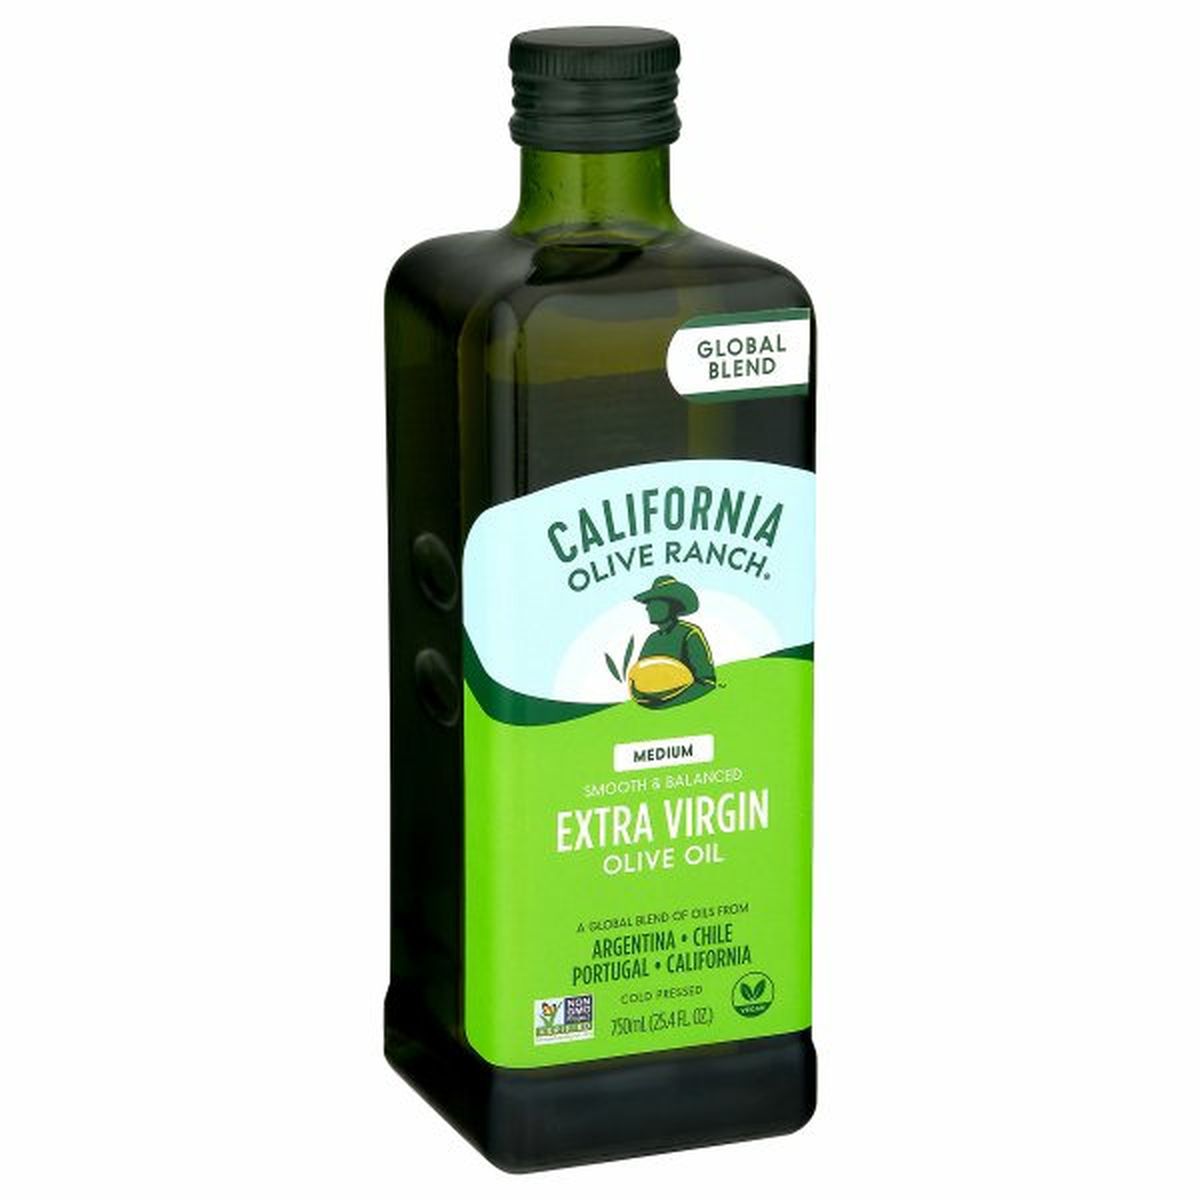 Calories in California Olive Ranch Olive Oil, Extra Virgin, Medium, Global Blend